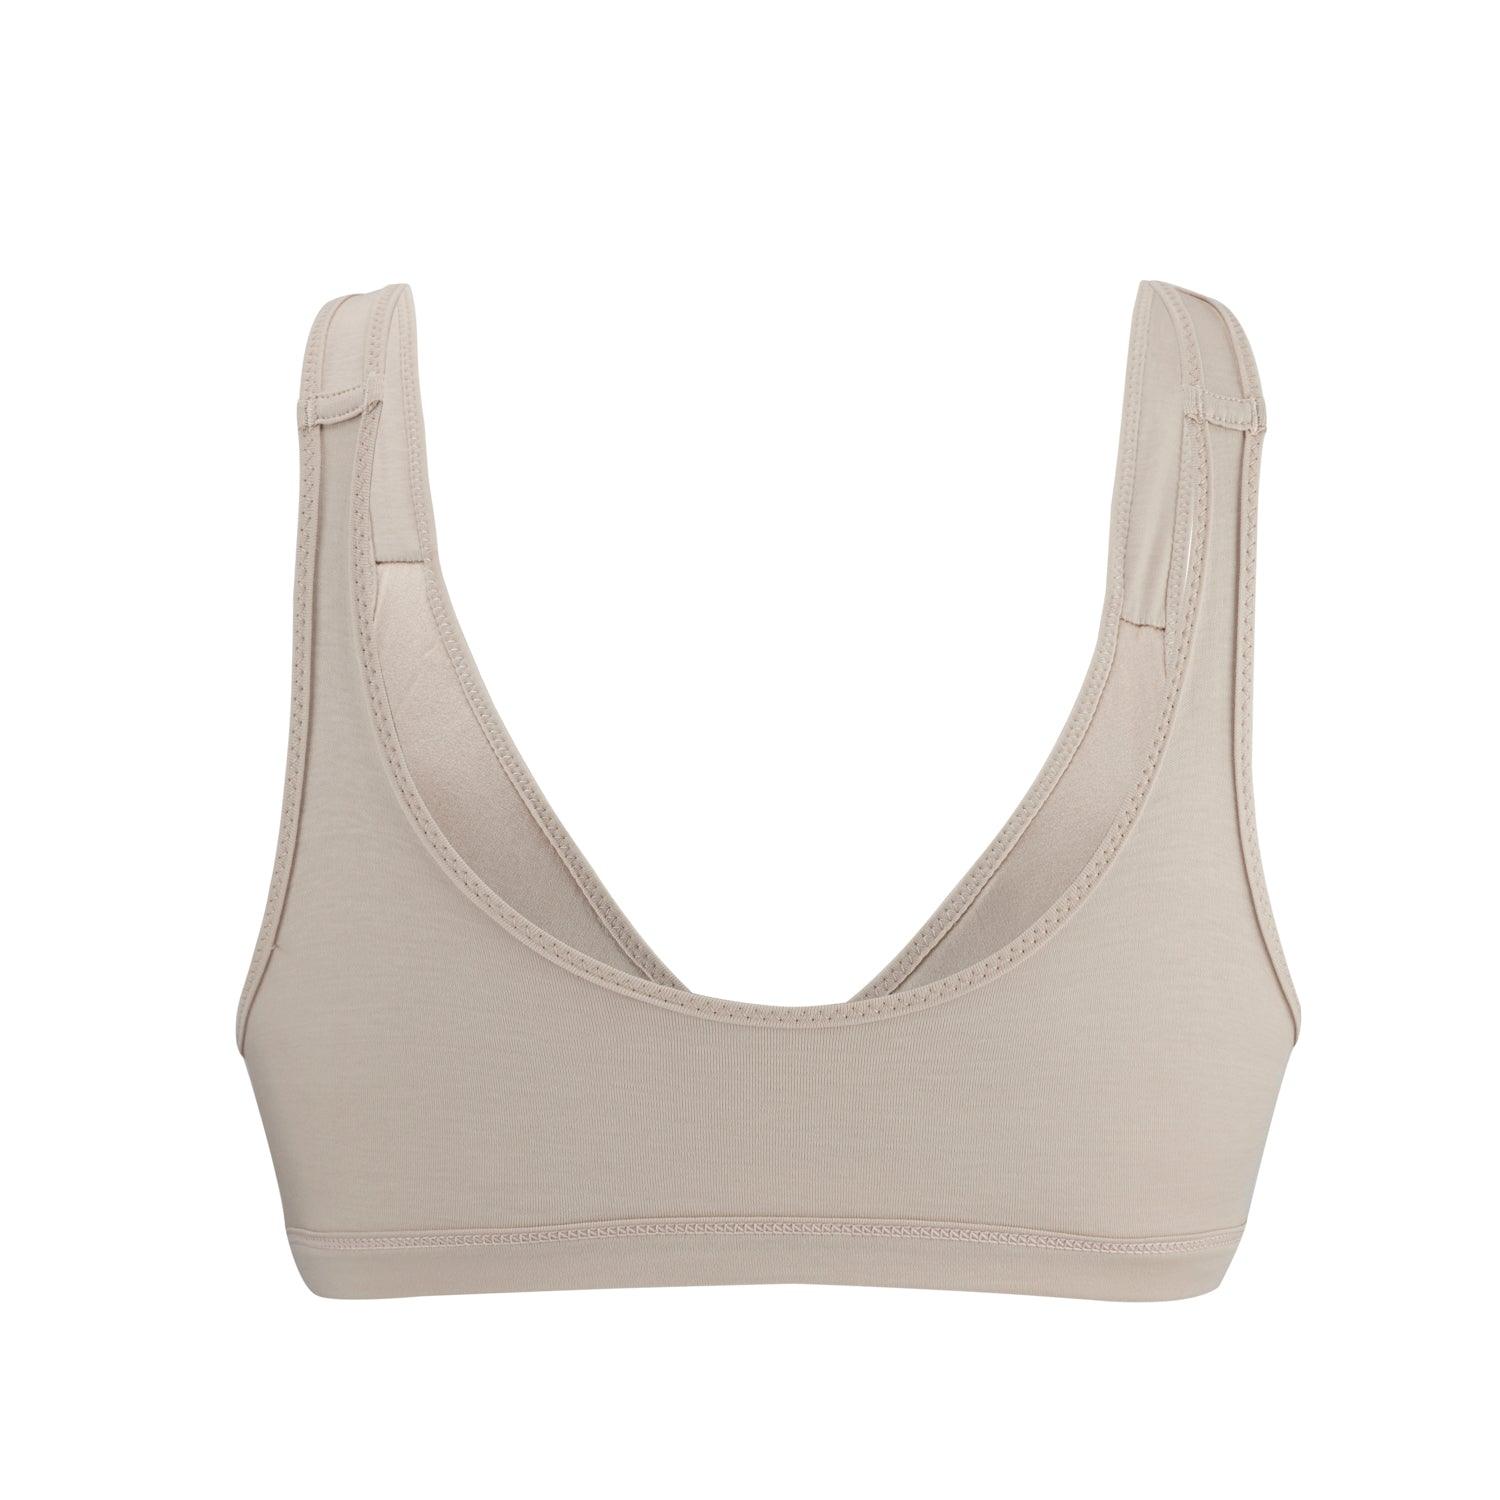 Ivory - Full Cup Front Closure Silk &amp; Organic Cotton Wireless Bra - Juliemay Lingerie